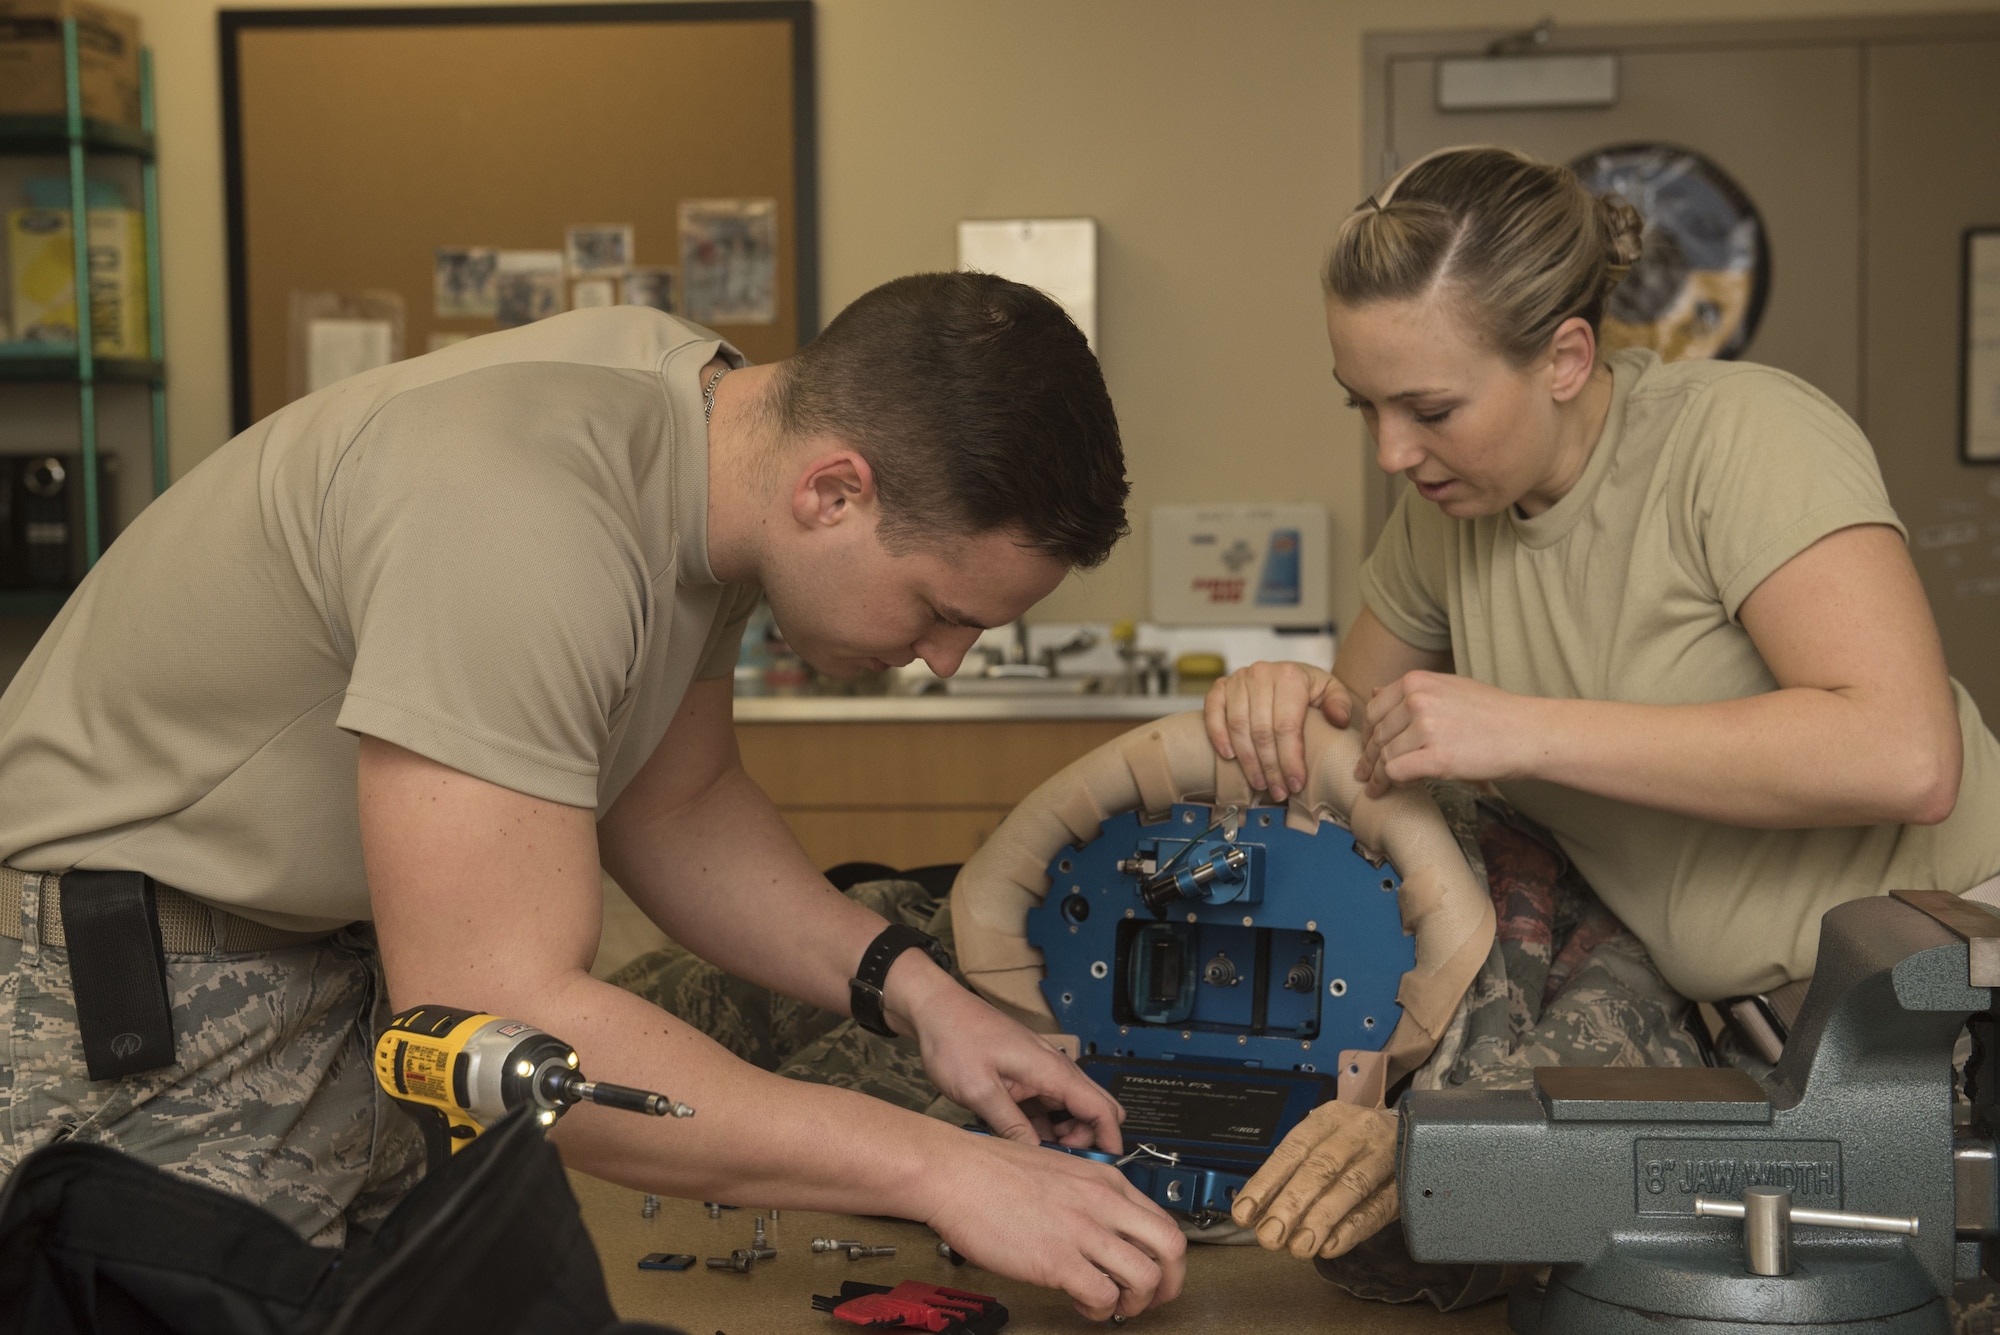 U.S. Air Force Airmen 1st Class Cody Knoll, left, and Jennifer Lesley, 20th Medical Support Squadron biomedical equipment technicians, take apart a trauma dummy prior to accomplishing a repair at Shaw Air Force Base, S.C., Jan. 31, 2018.